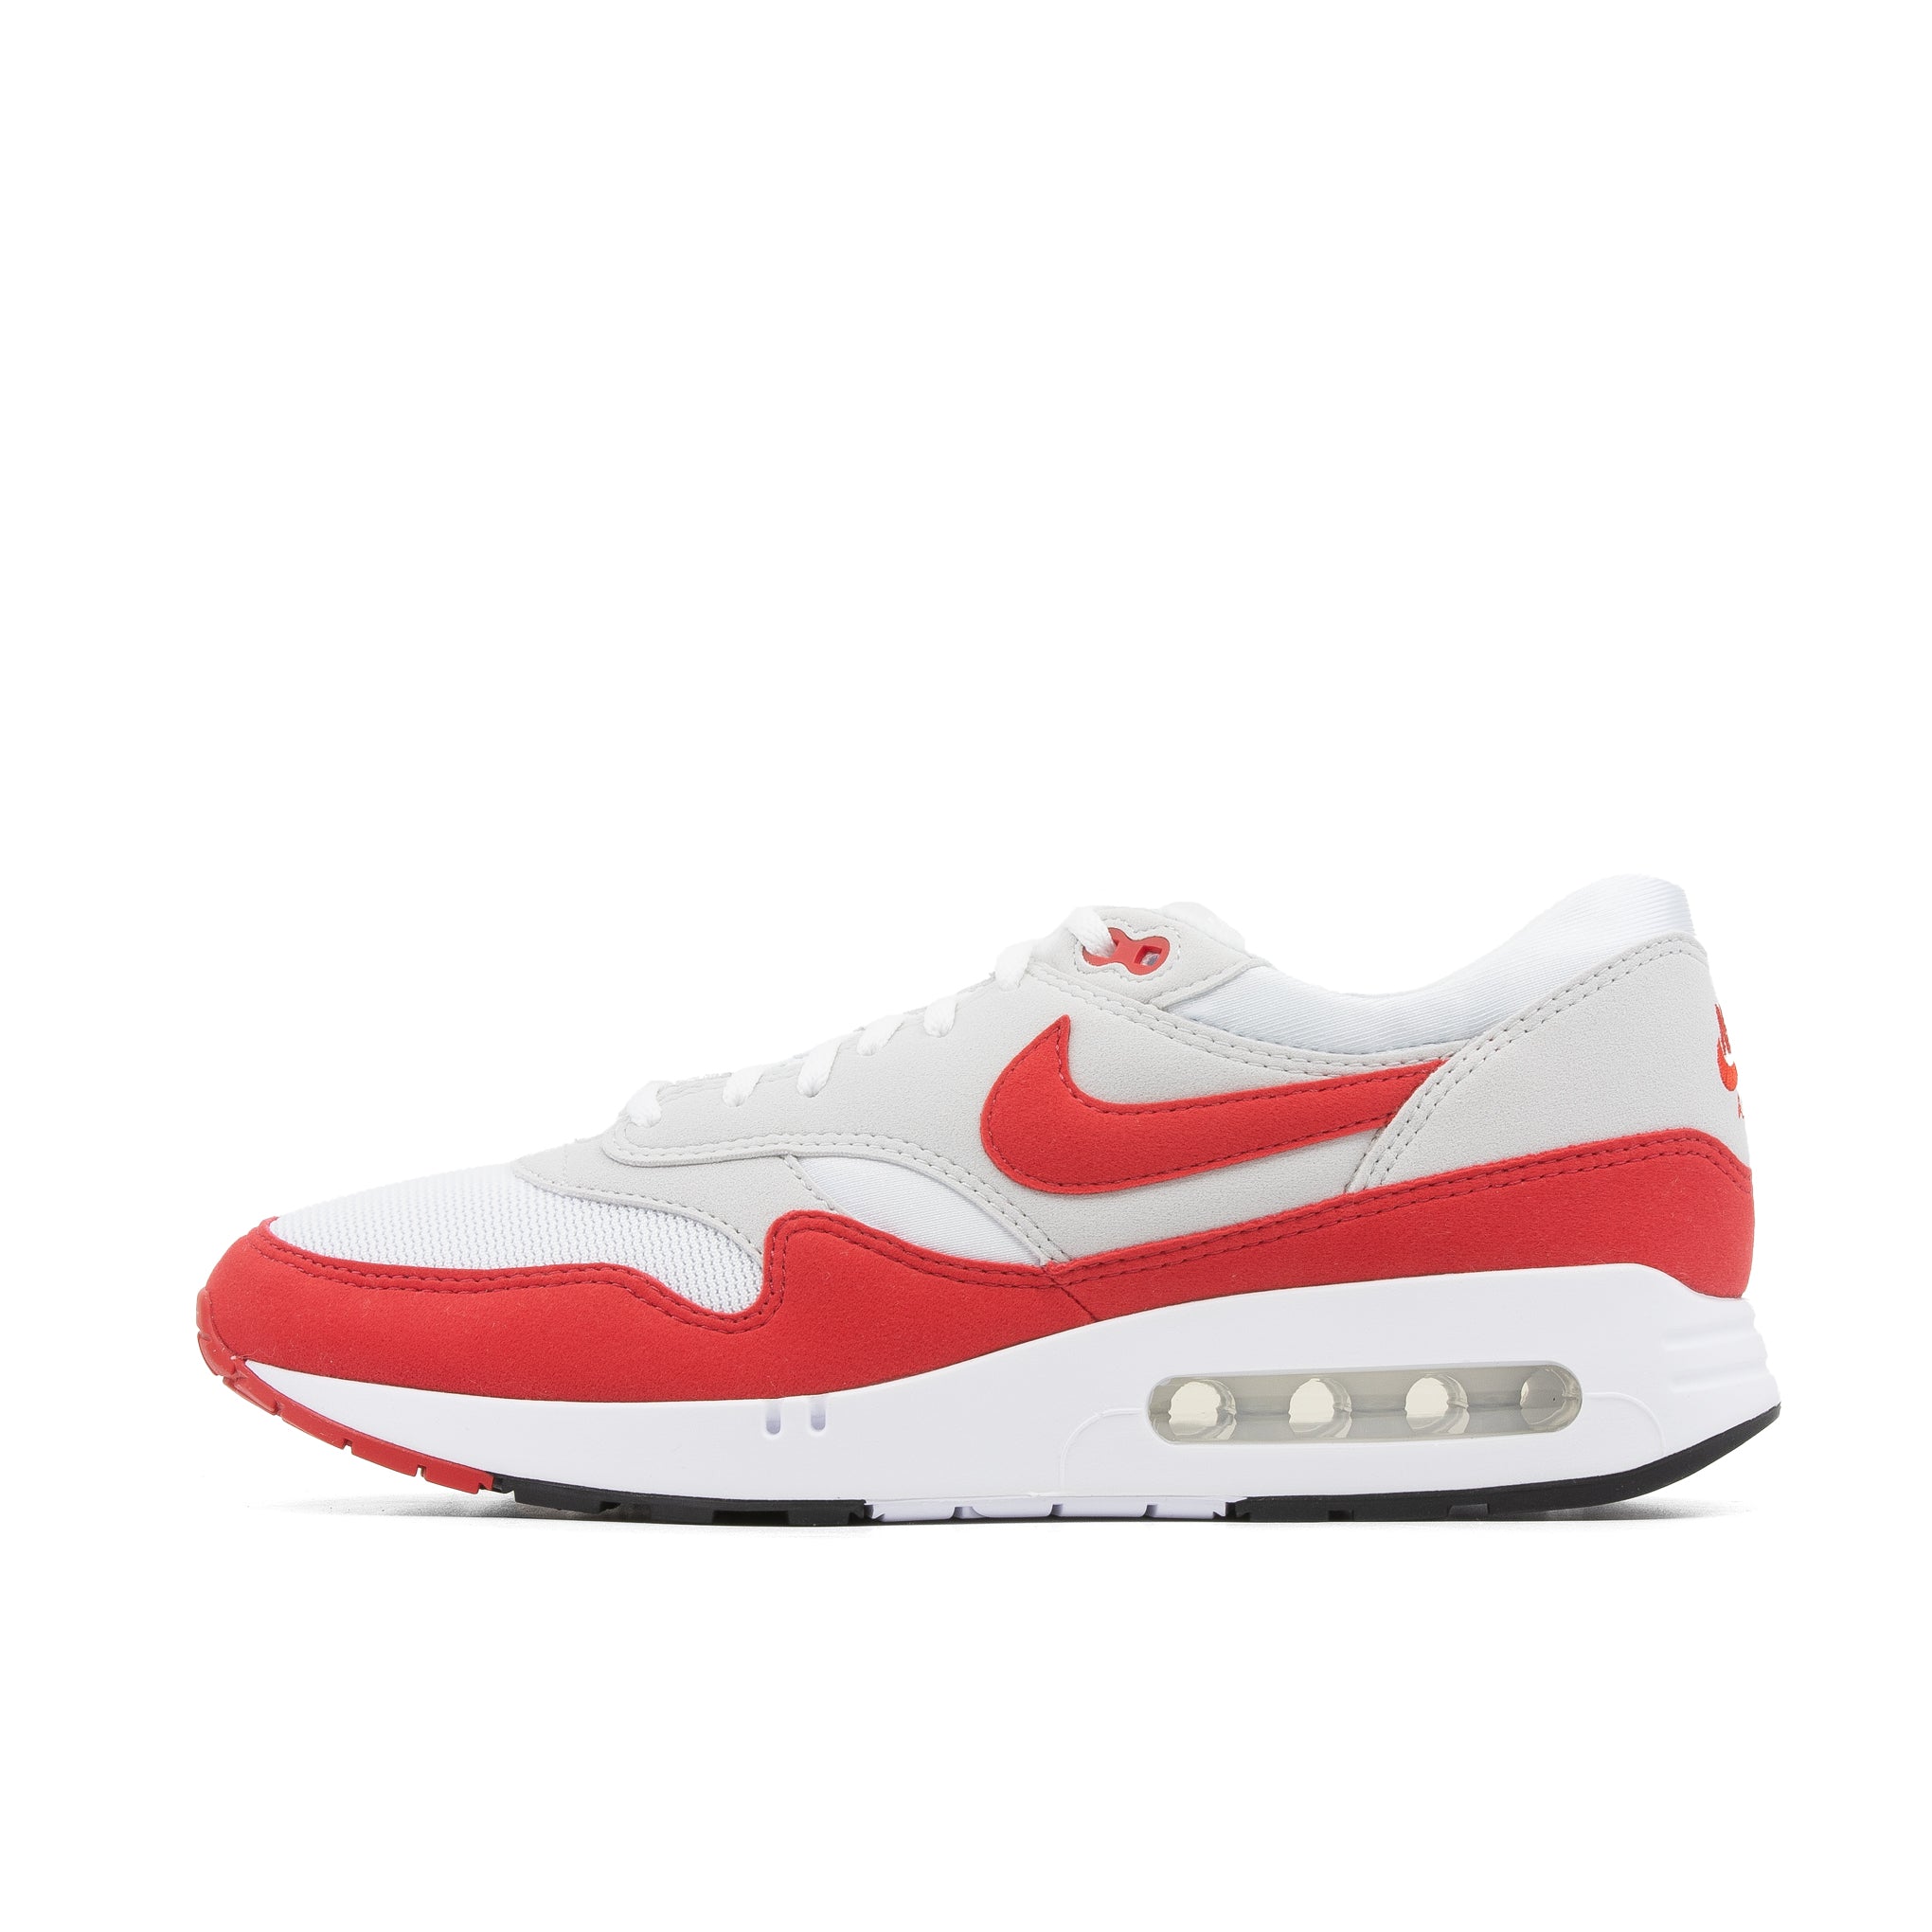 NIKE AIR MAX 1 '86 BIG BUBBLE SPORT RED